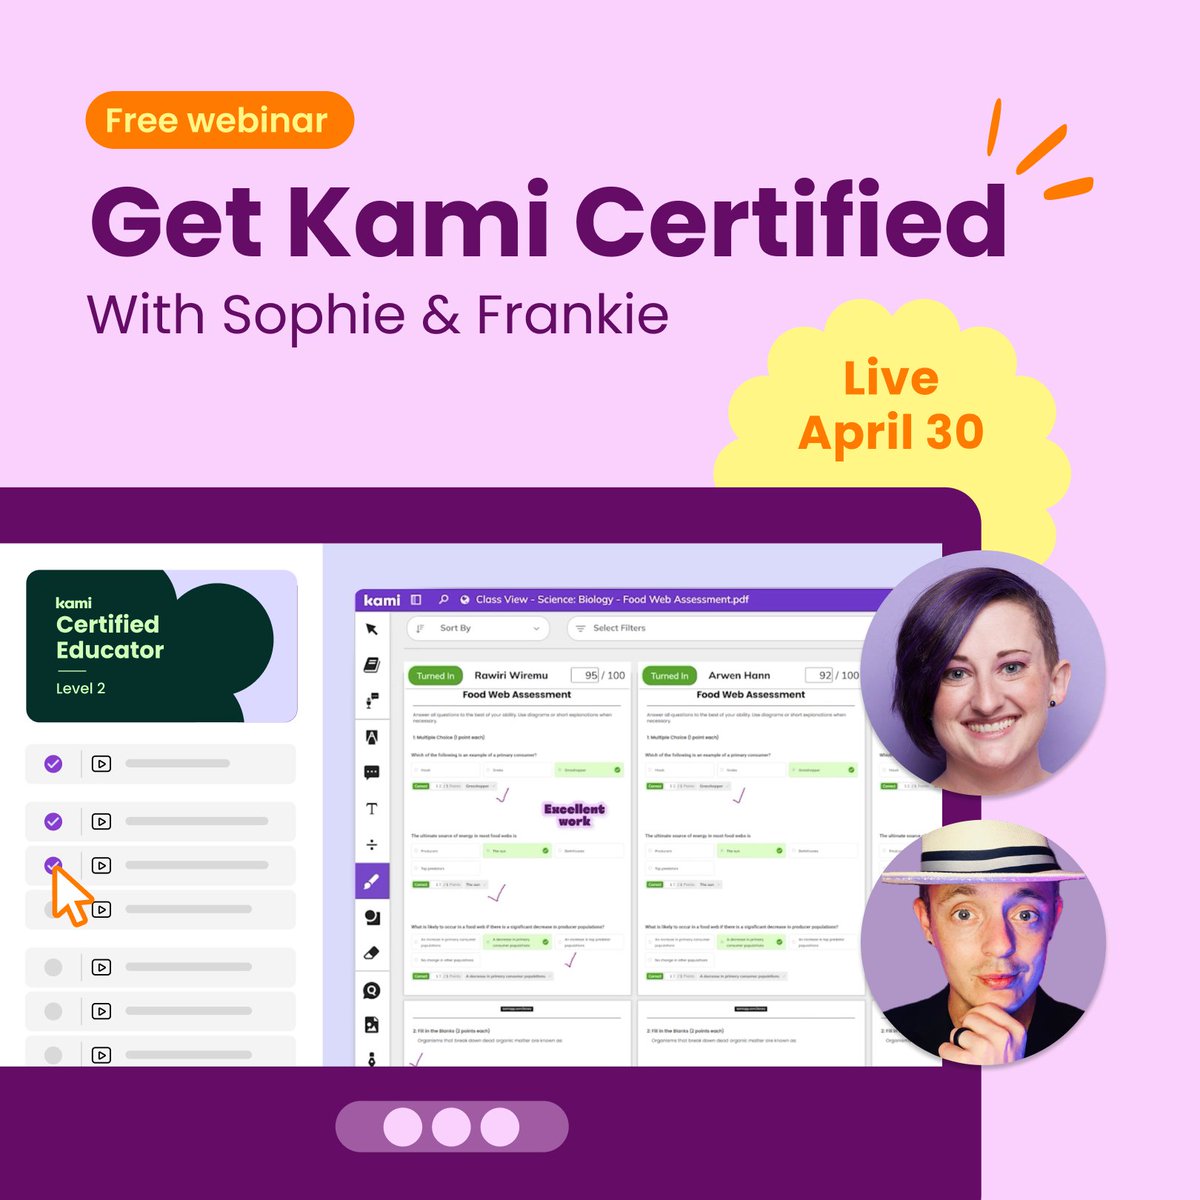 Join me and Frankie TOMORROW for a free guided expedition through the Level 1 Certified course. You’ll learn all the time-saving workflows & teacher tips you need! 3 options to register 👉 kami.app/Webinar-KamiCe…